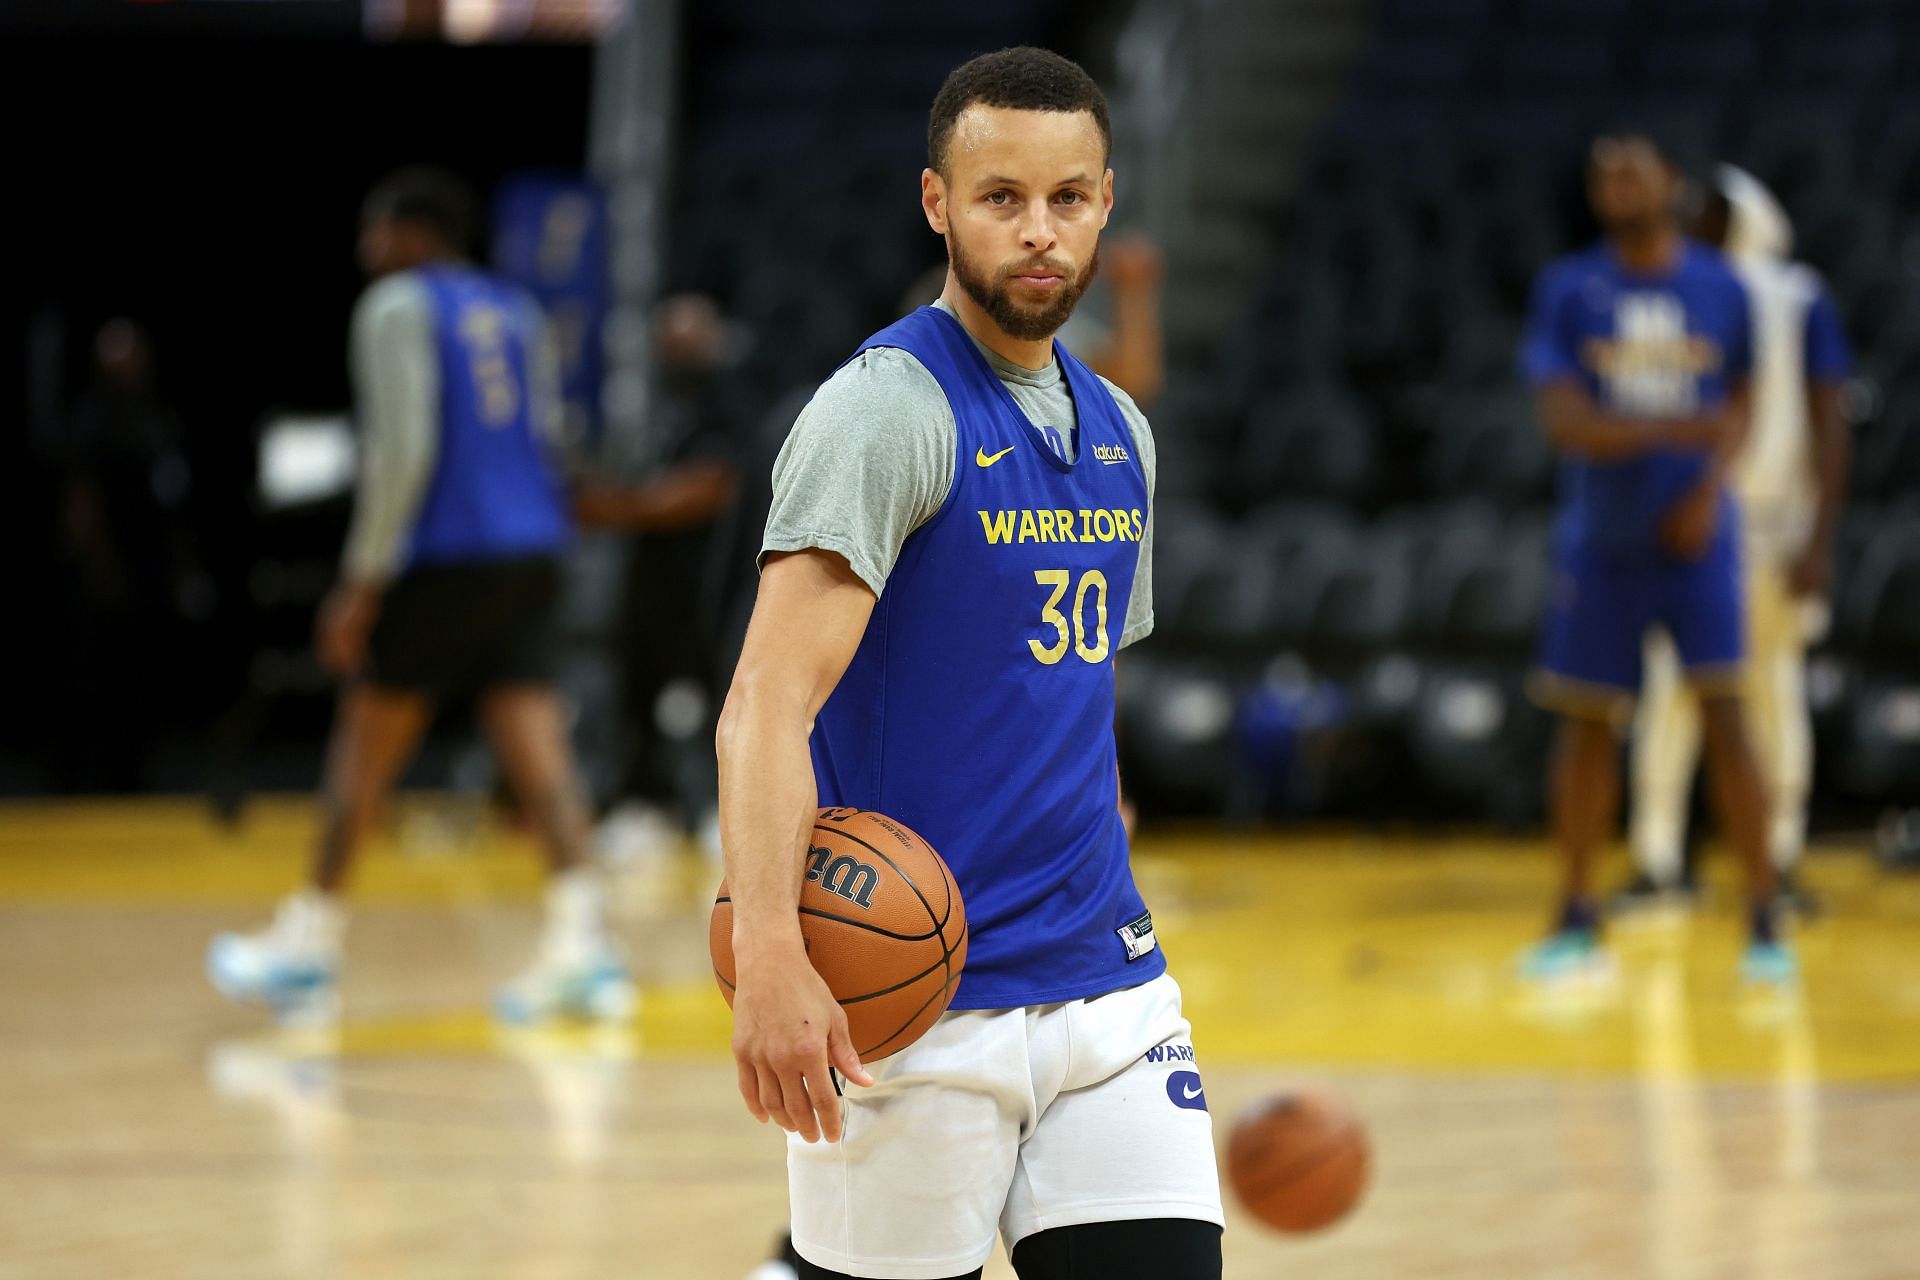 Golden State Warriors superstar Steph Curry at the 2022 NBA Finals - Media Day